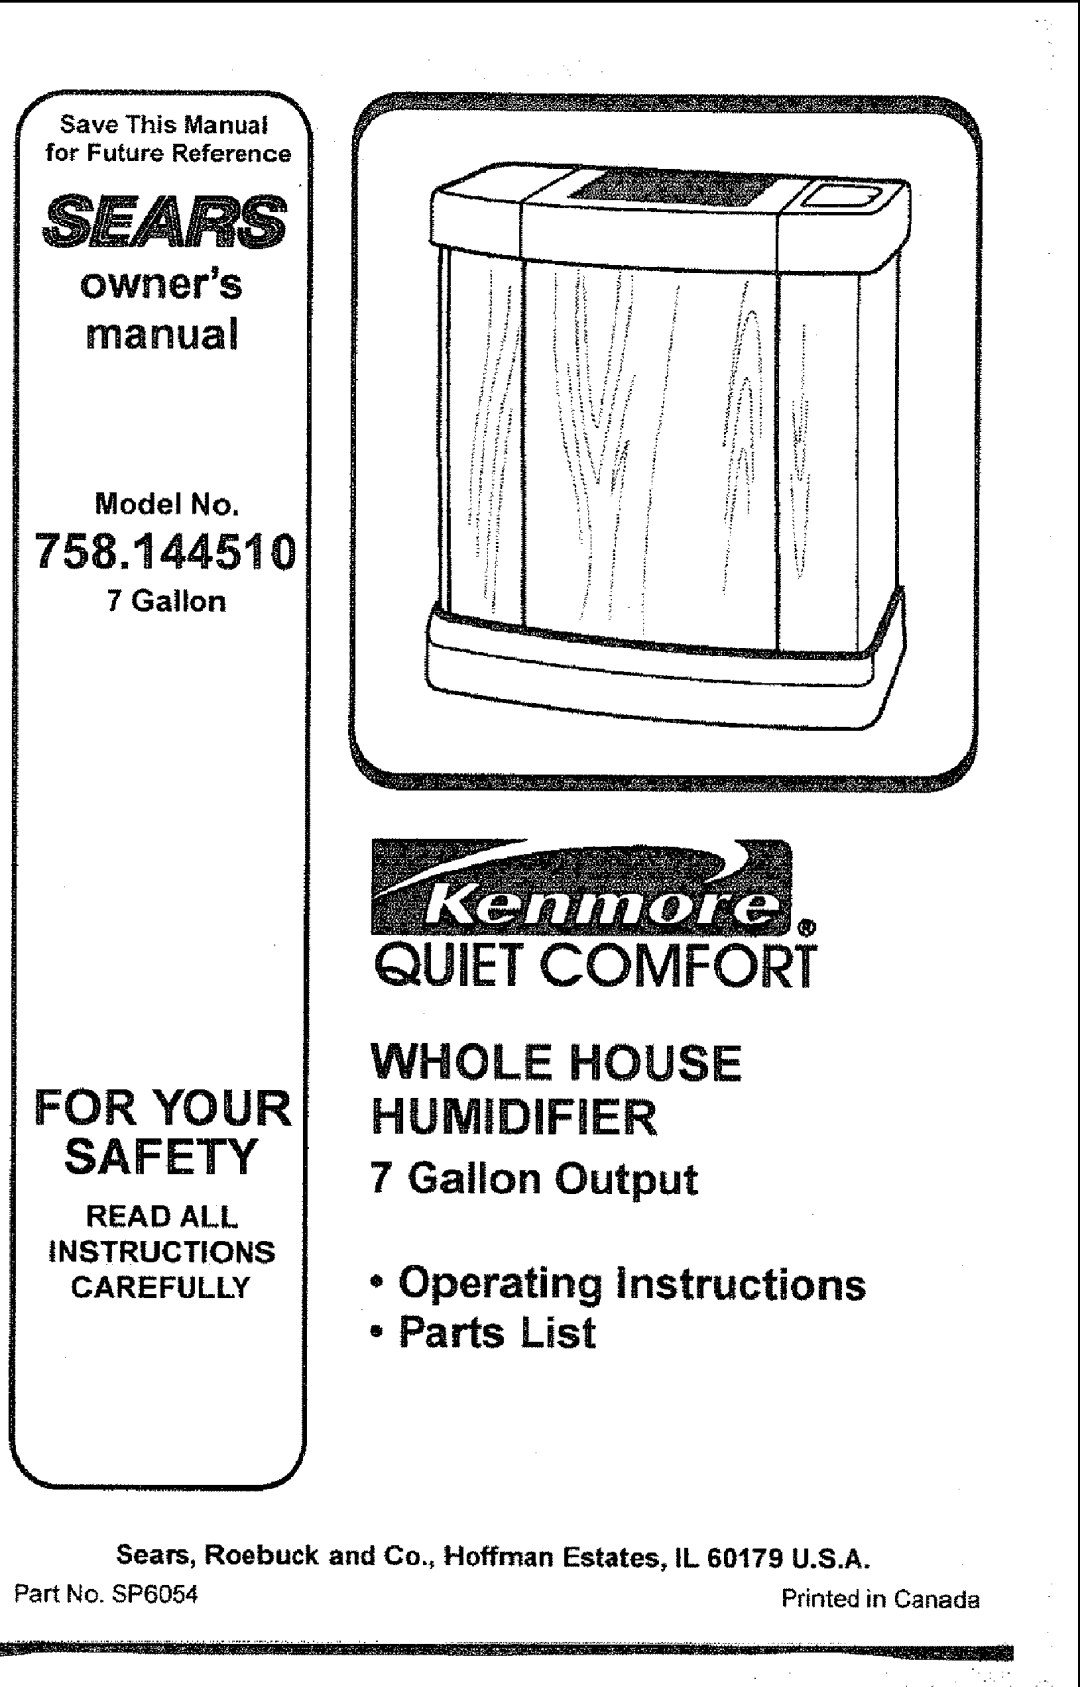 Sears owner manual Quietcomfort, 8EARS, 758.144510, For Your Safety, WHOLE HOUSE HUMiDiFiER, owners, Printedin Canada 